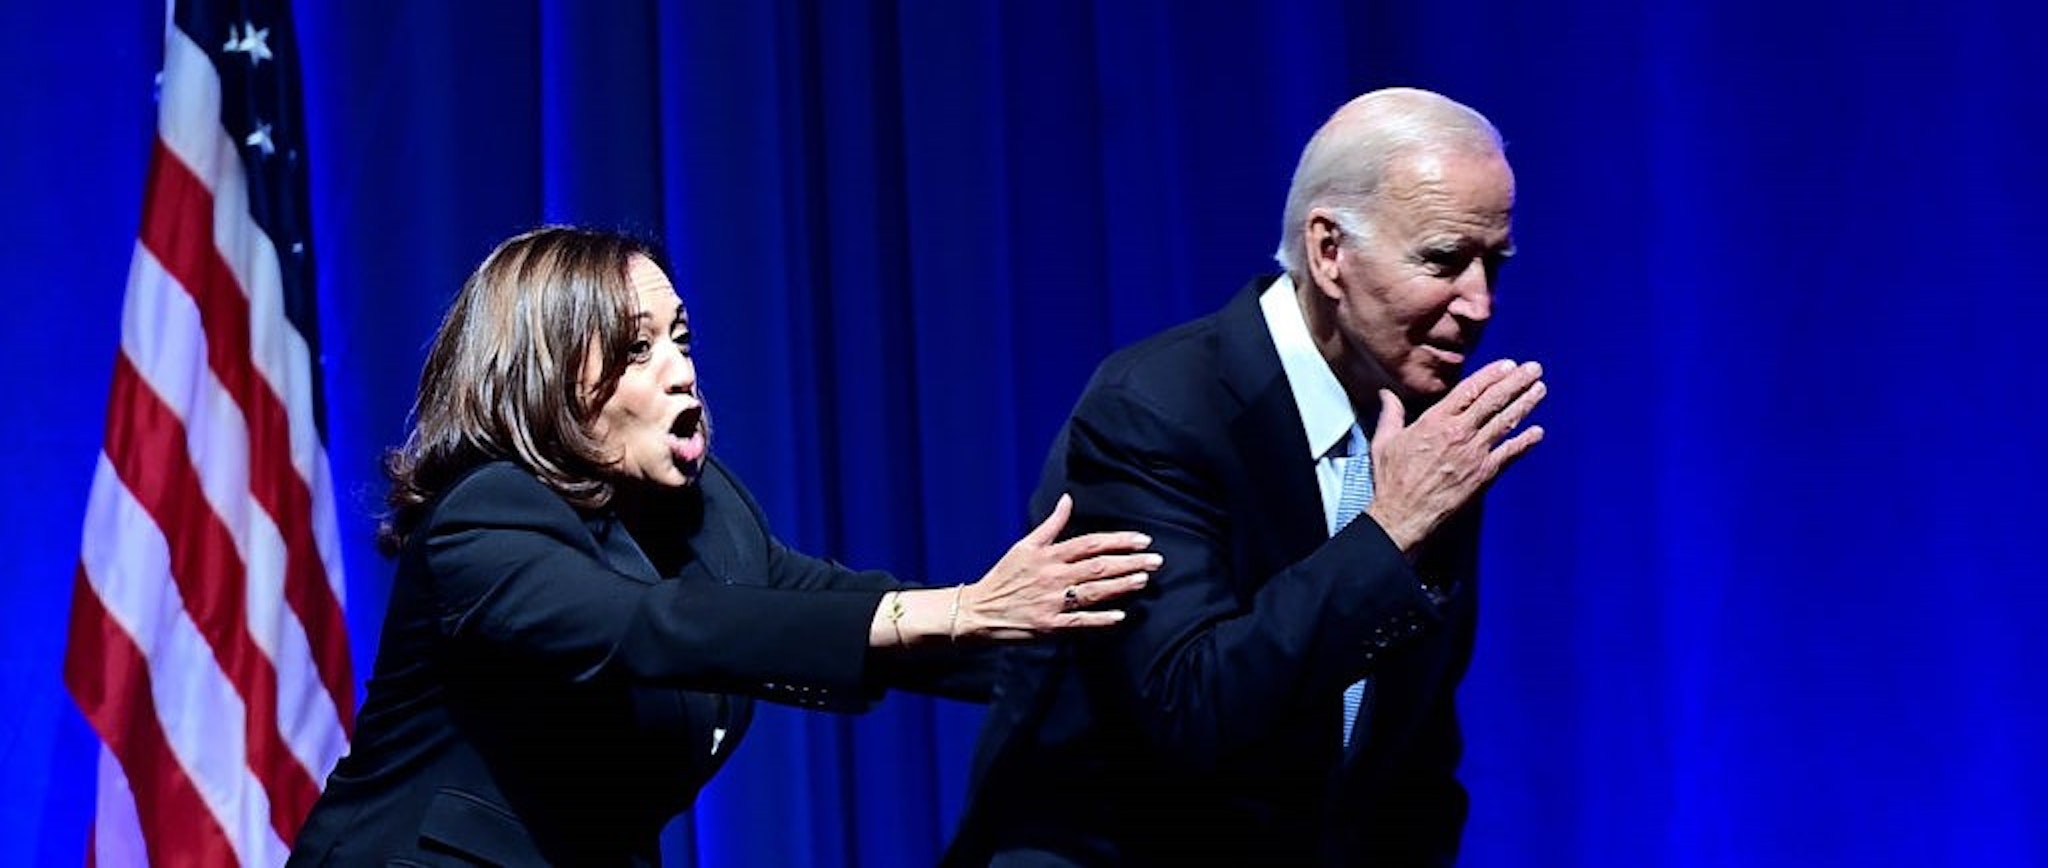 PHILADELPHIA, PA - OCTOBER 28: US President Joe Biden and US Vice President Kamala Harris react while greeting supporters during the Democratic Party's Independence Dinner on October 28, 2022 in Philadelphia, Pennsylvania. Election Day will be held on November 8. (Photo by